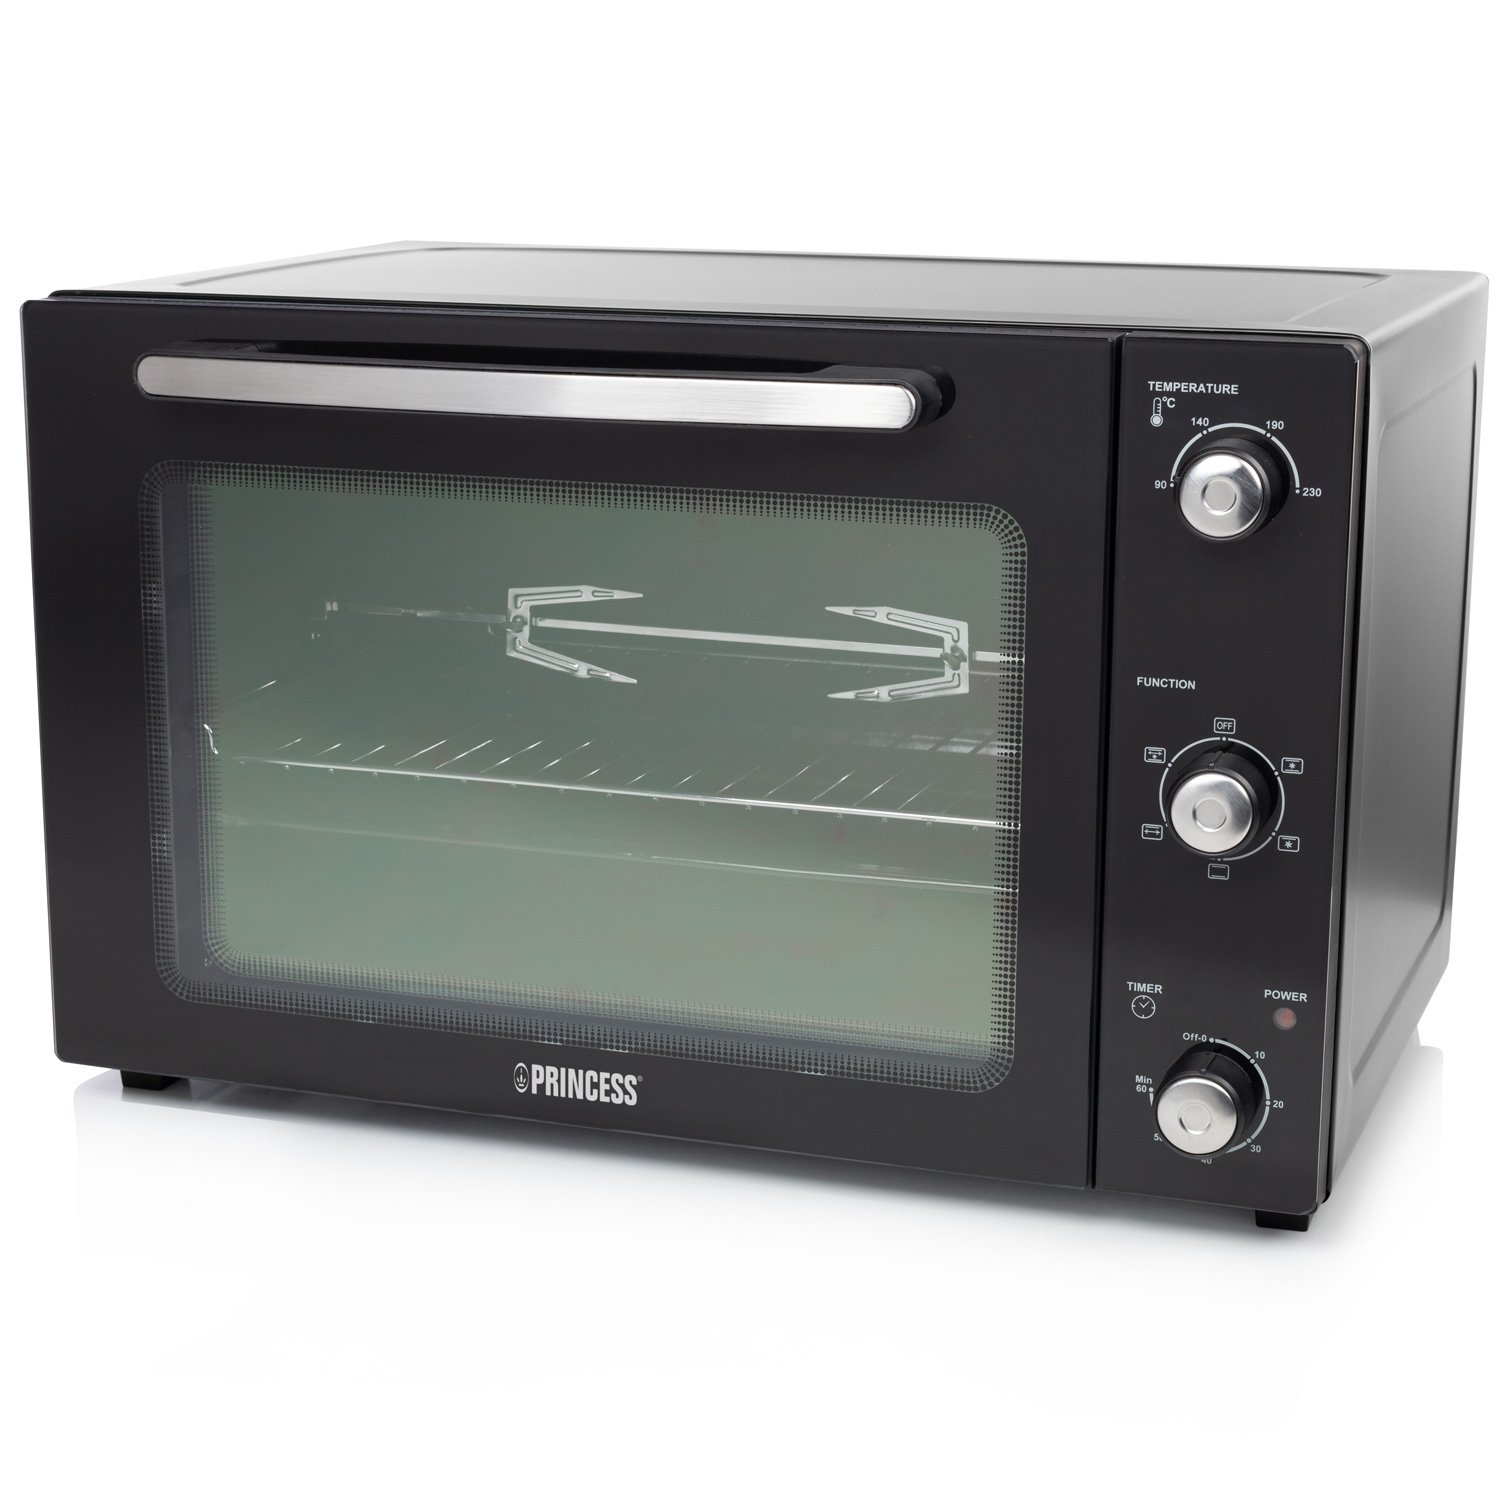 Princess Bänkugn Convection Oven DeLuxe 112761 55l